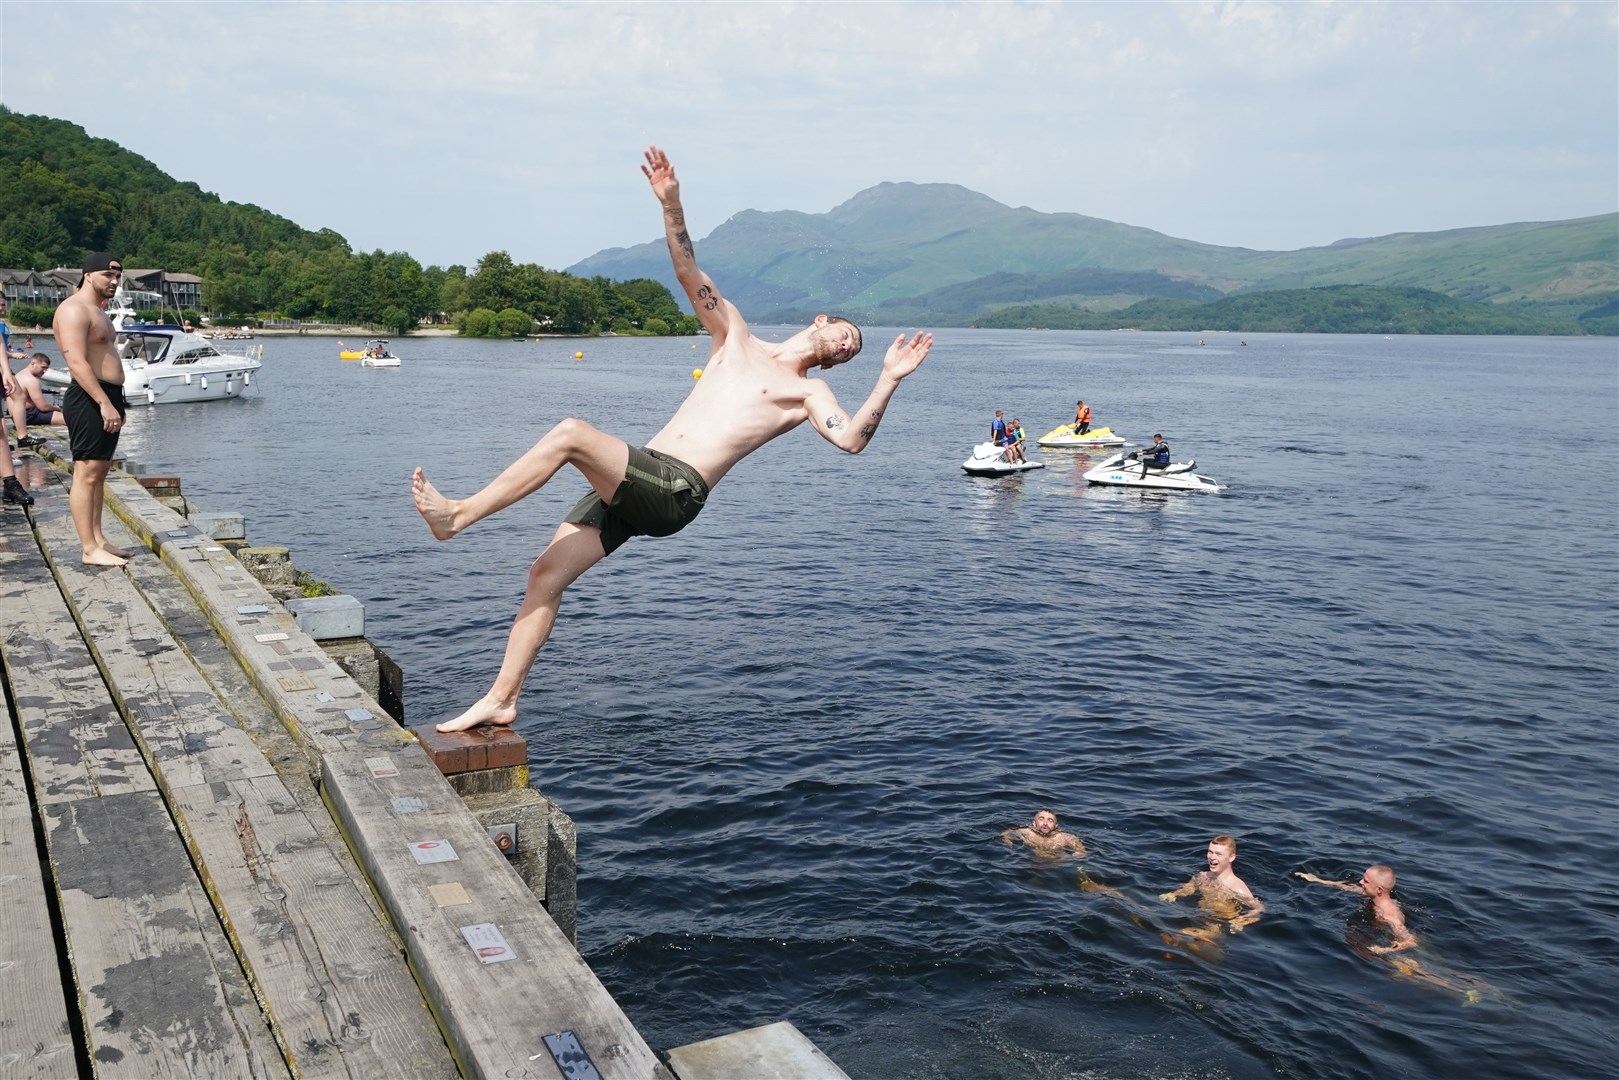 Luss on Loch Lomond proved to be the perfect spot to cool off for these thrill-seekers (Andrew Milligan/PA)